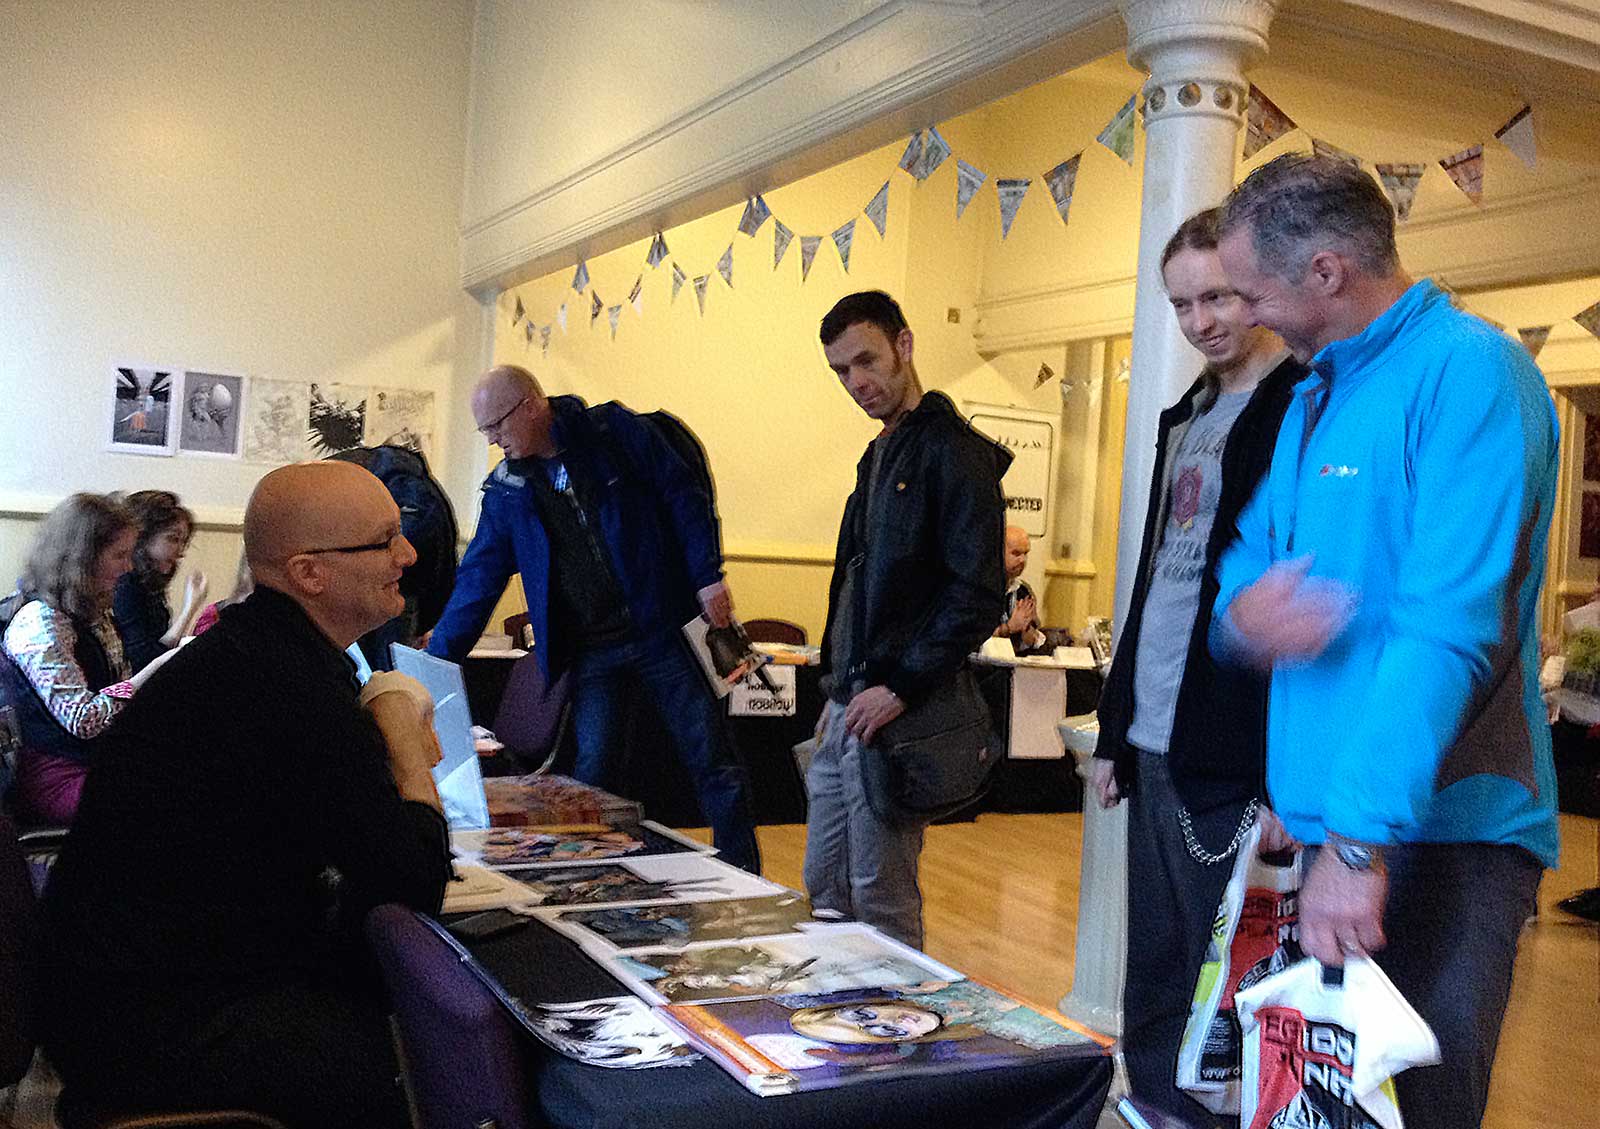 Artist Gary Erskine chatting with fans in the Clock Tower at last year's Lakes International Comic Art Festival. Far left: locally-based artist Kate Holden. In the background: artist Conor Boyle on the Disconnected Press stand